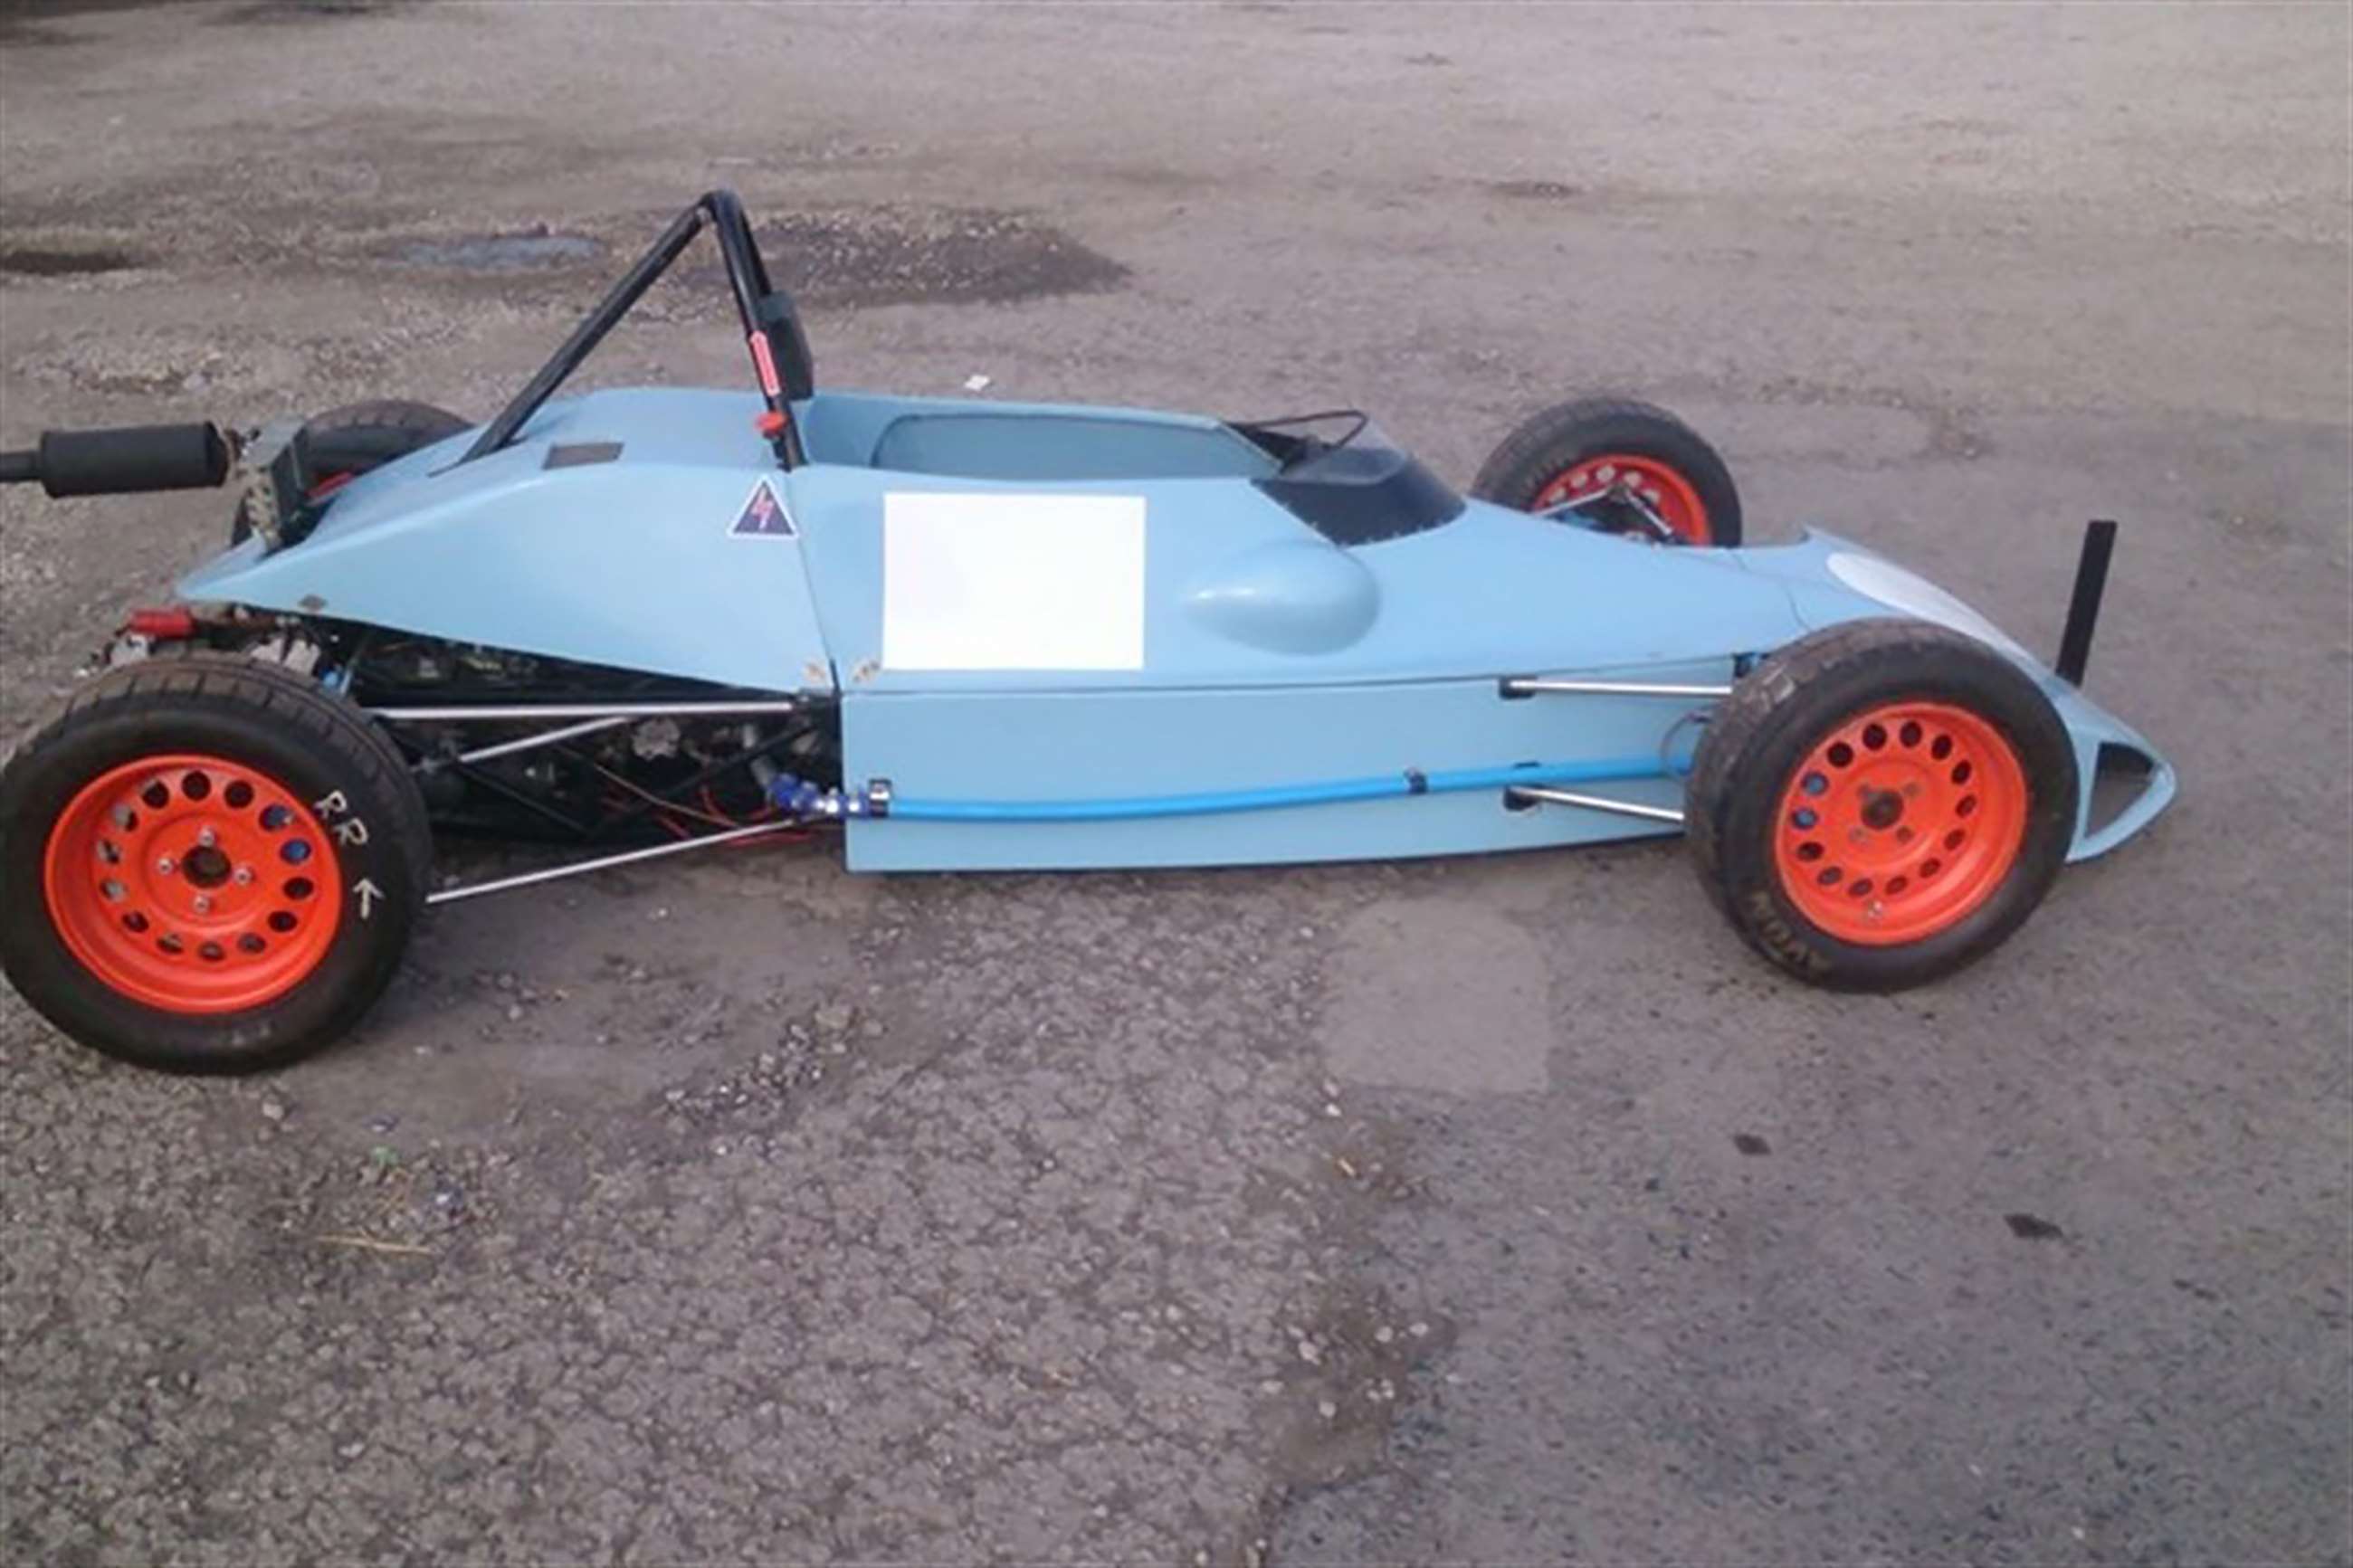 The Image Formula Ford car – photo courtesy of Racecarsdirect